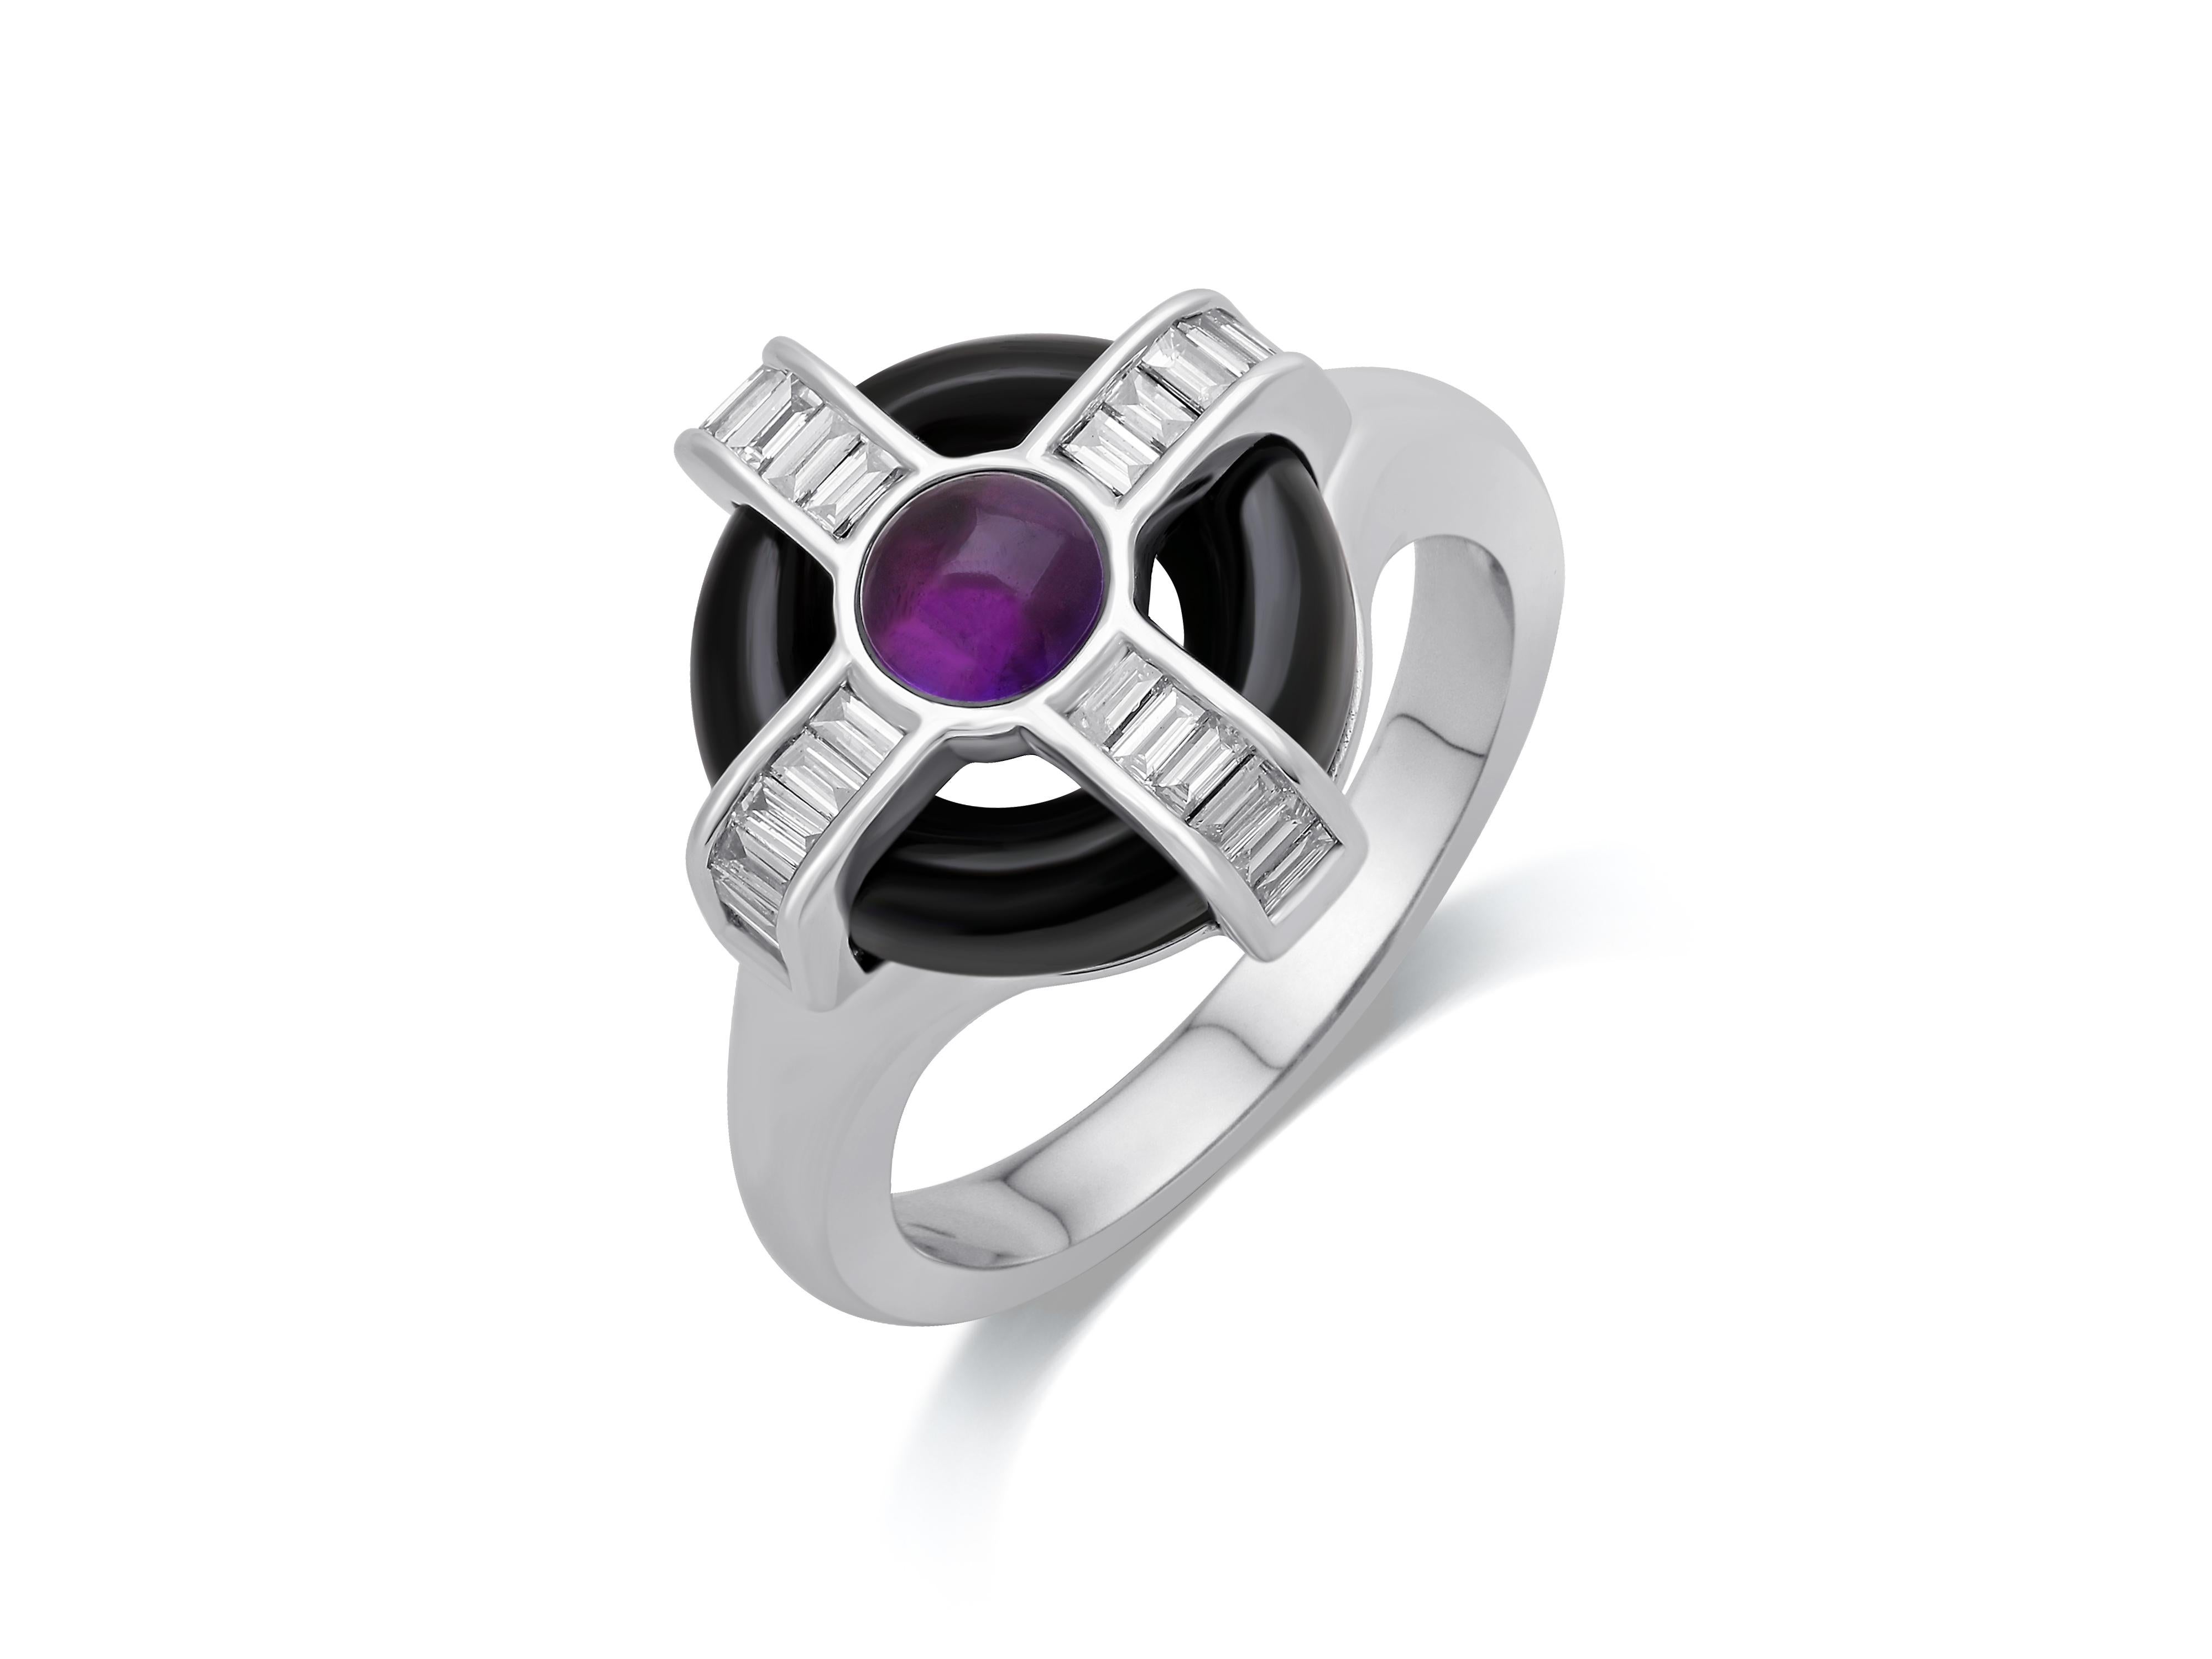 Contrasting colours and a mix of clean lines and smooth curves merge to create the distinctive look of Atelo’s Deco Wheel Collection.

This deco-inspired ring combines black onyx, baguette (rectangular) diamonds and amethyst to create a striking